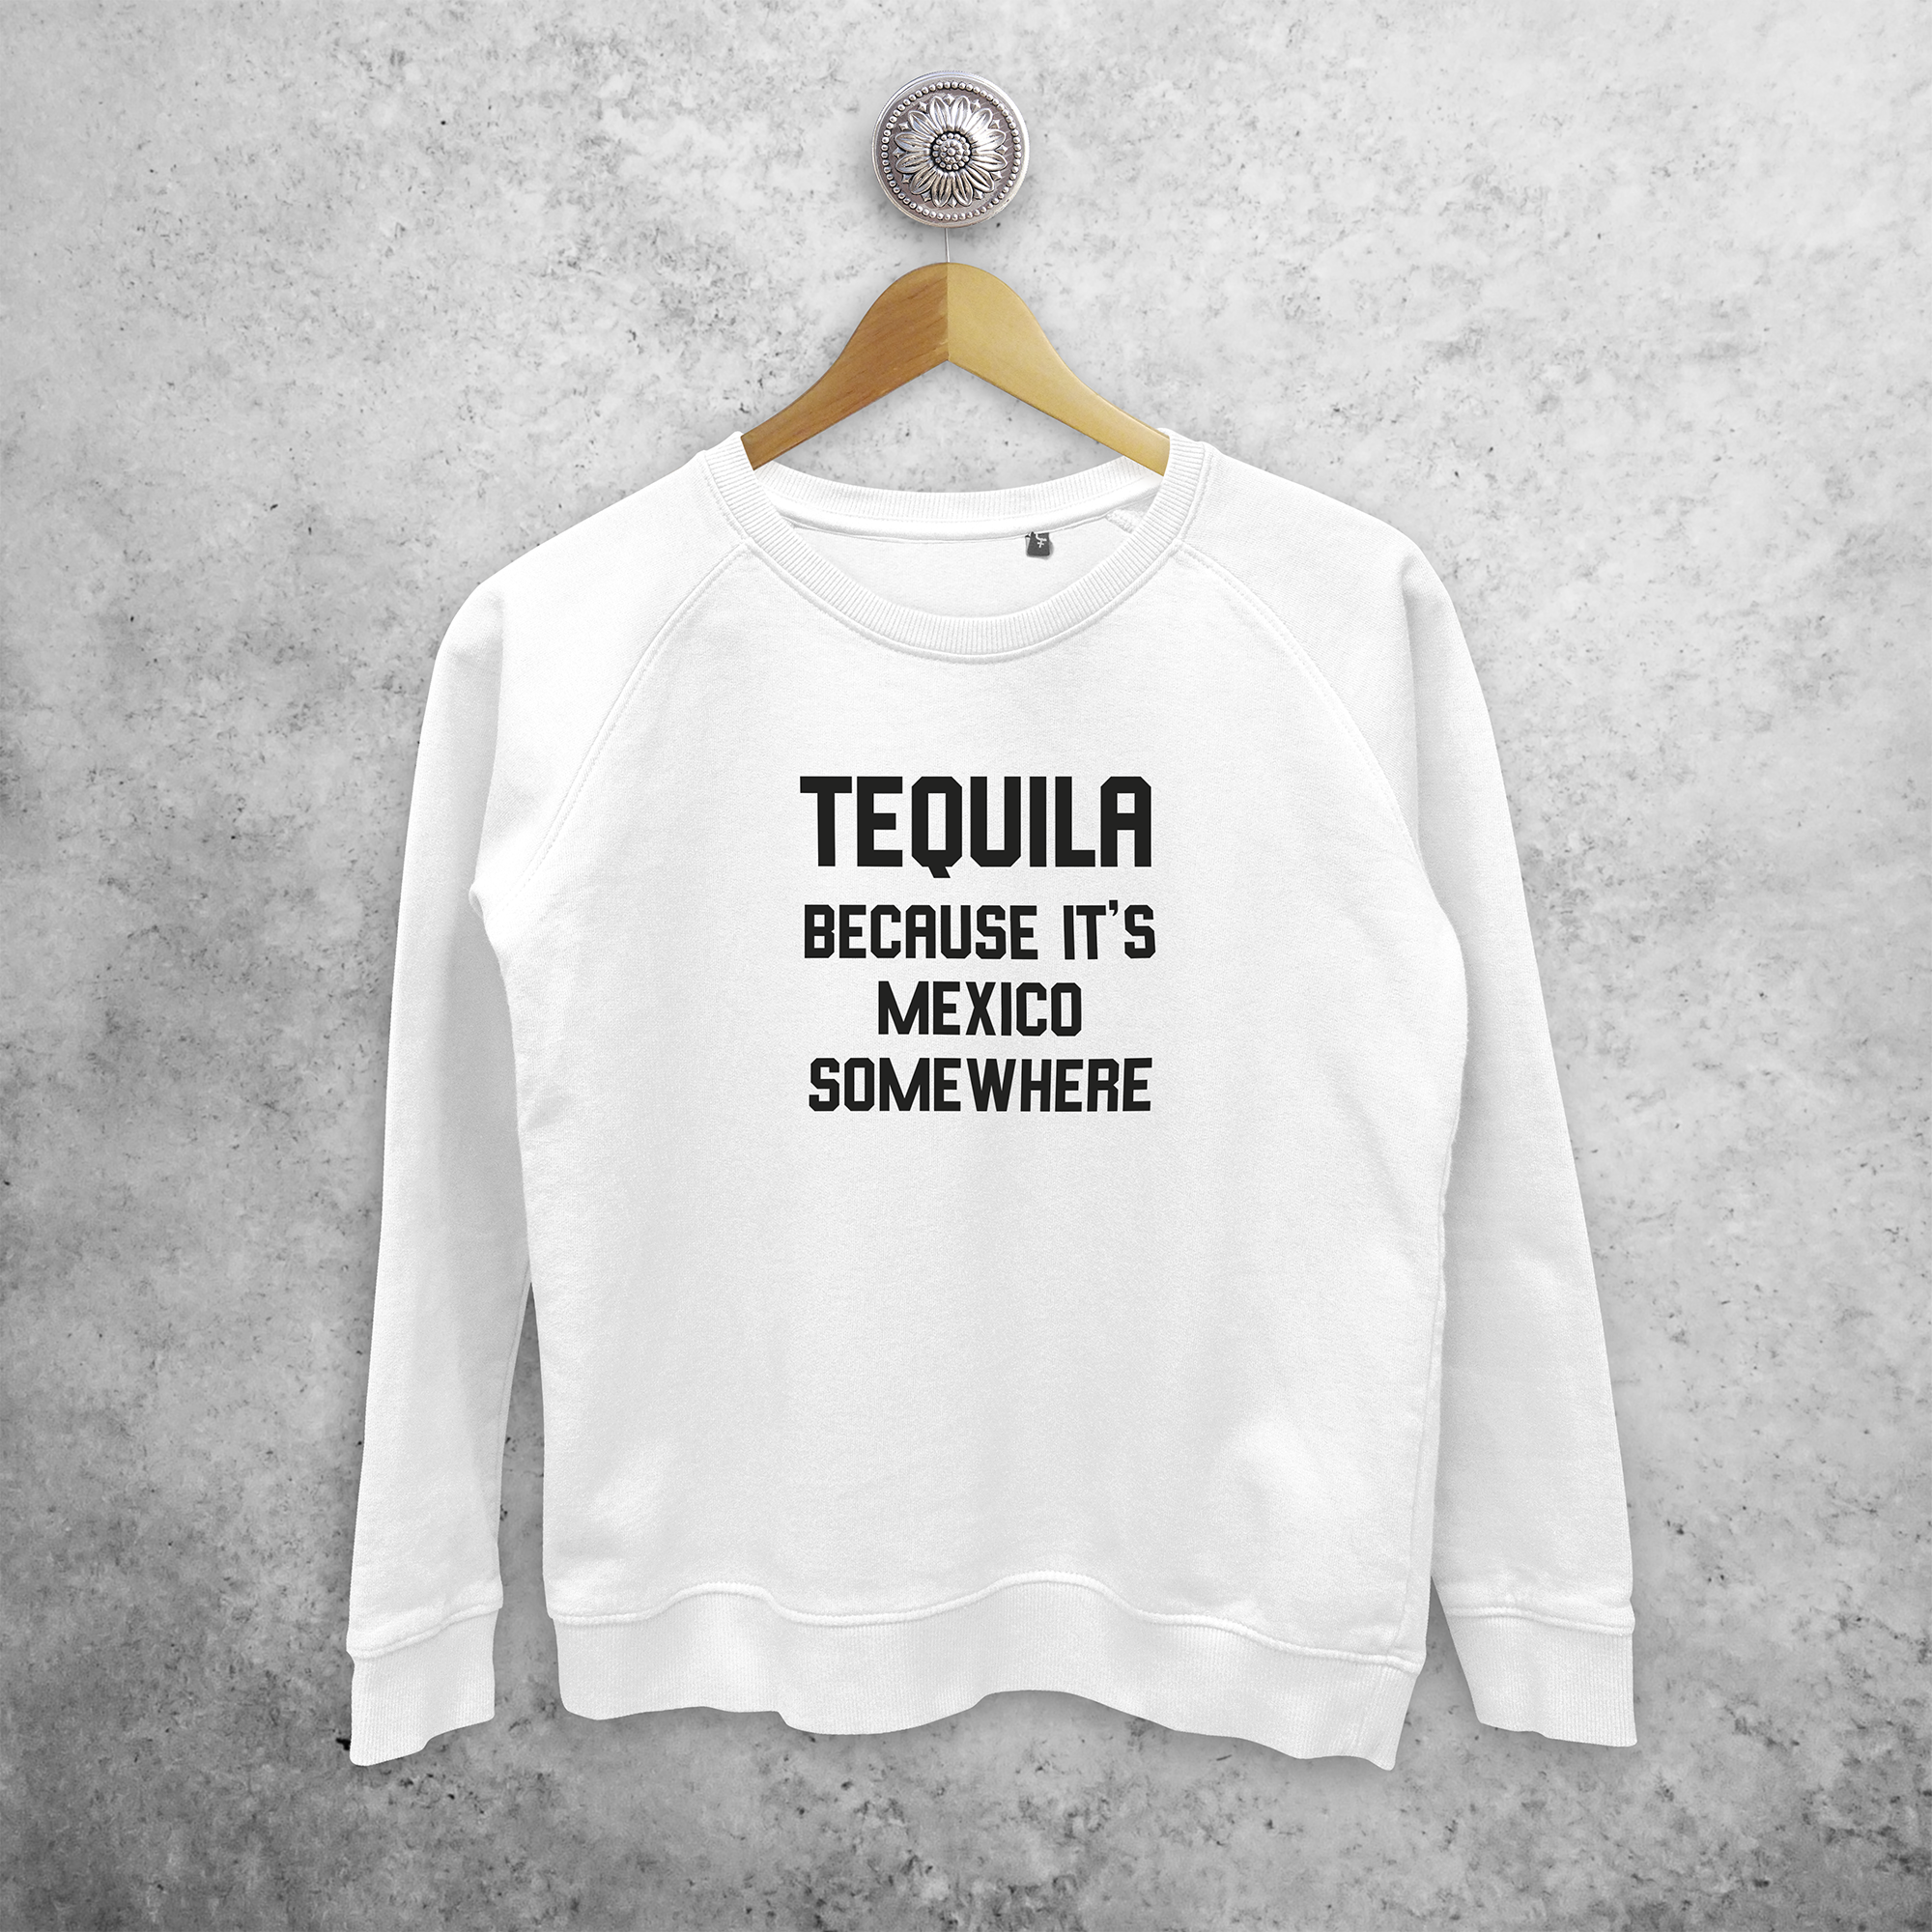 'Tequila, because it's Mexico somewhere' sweater